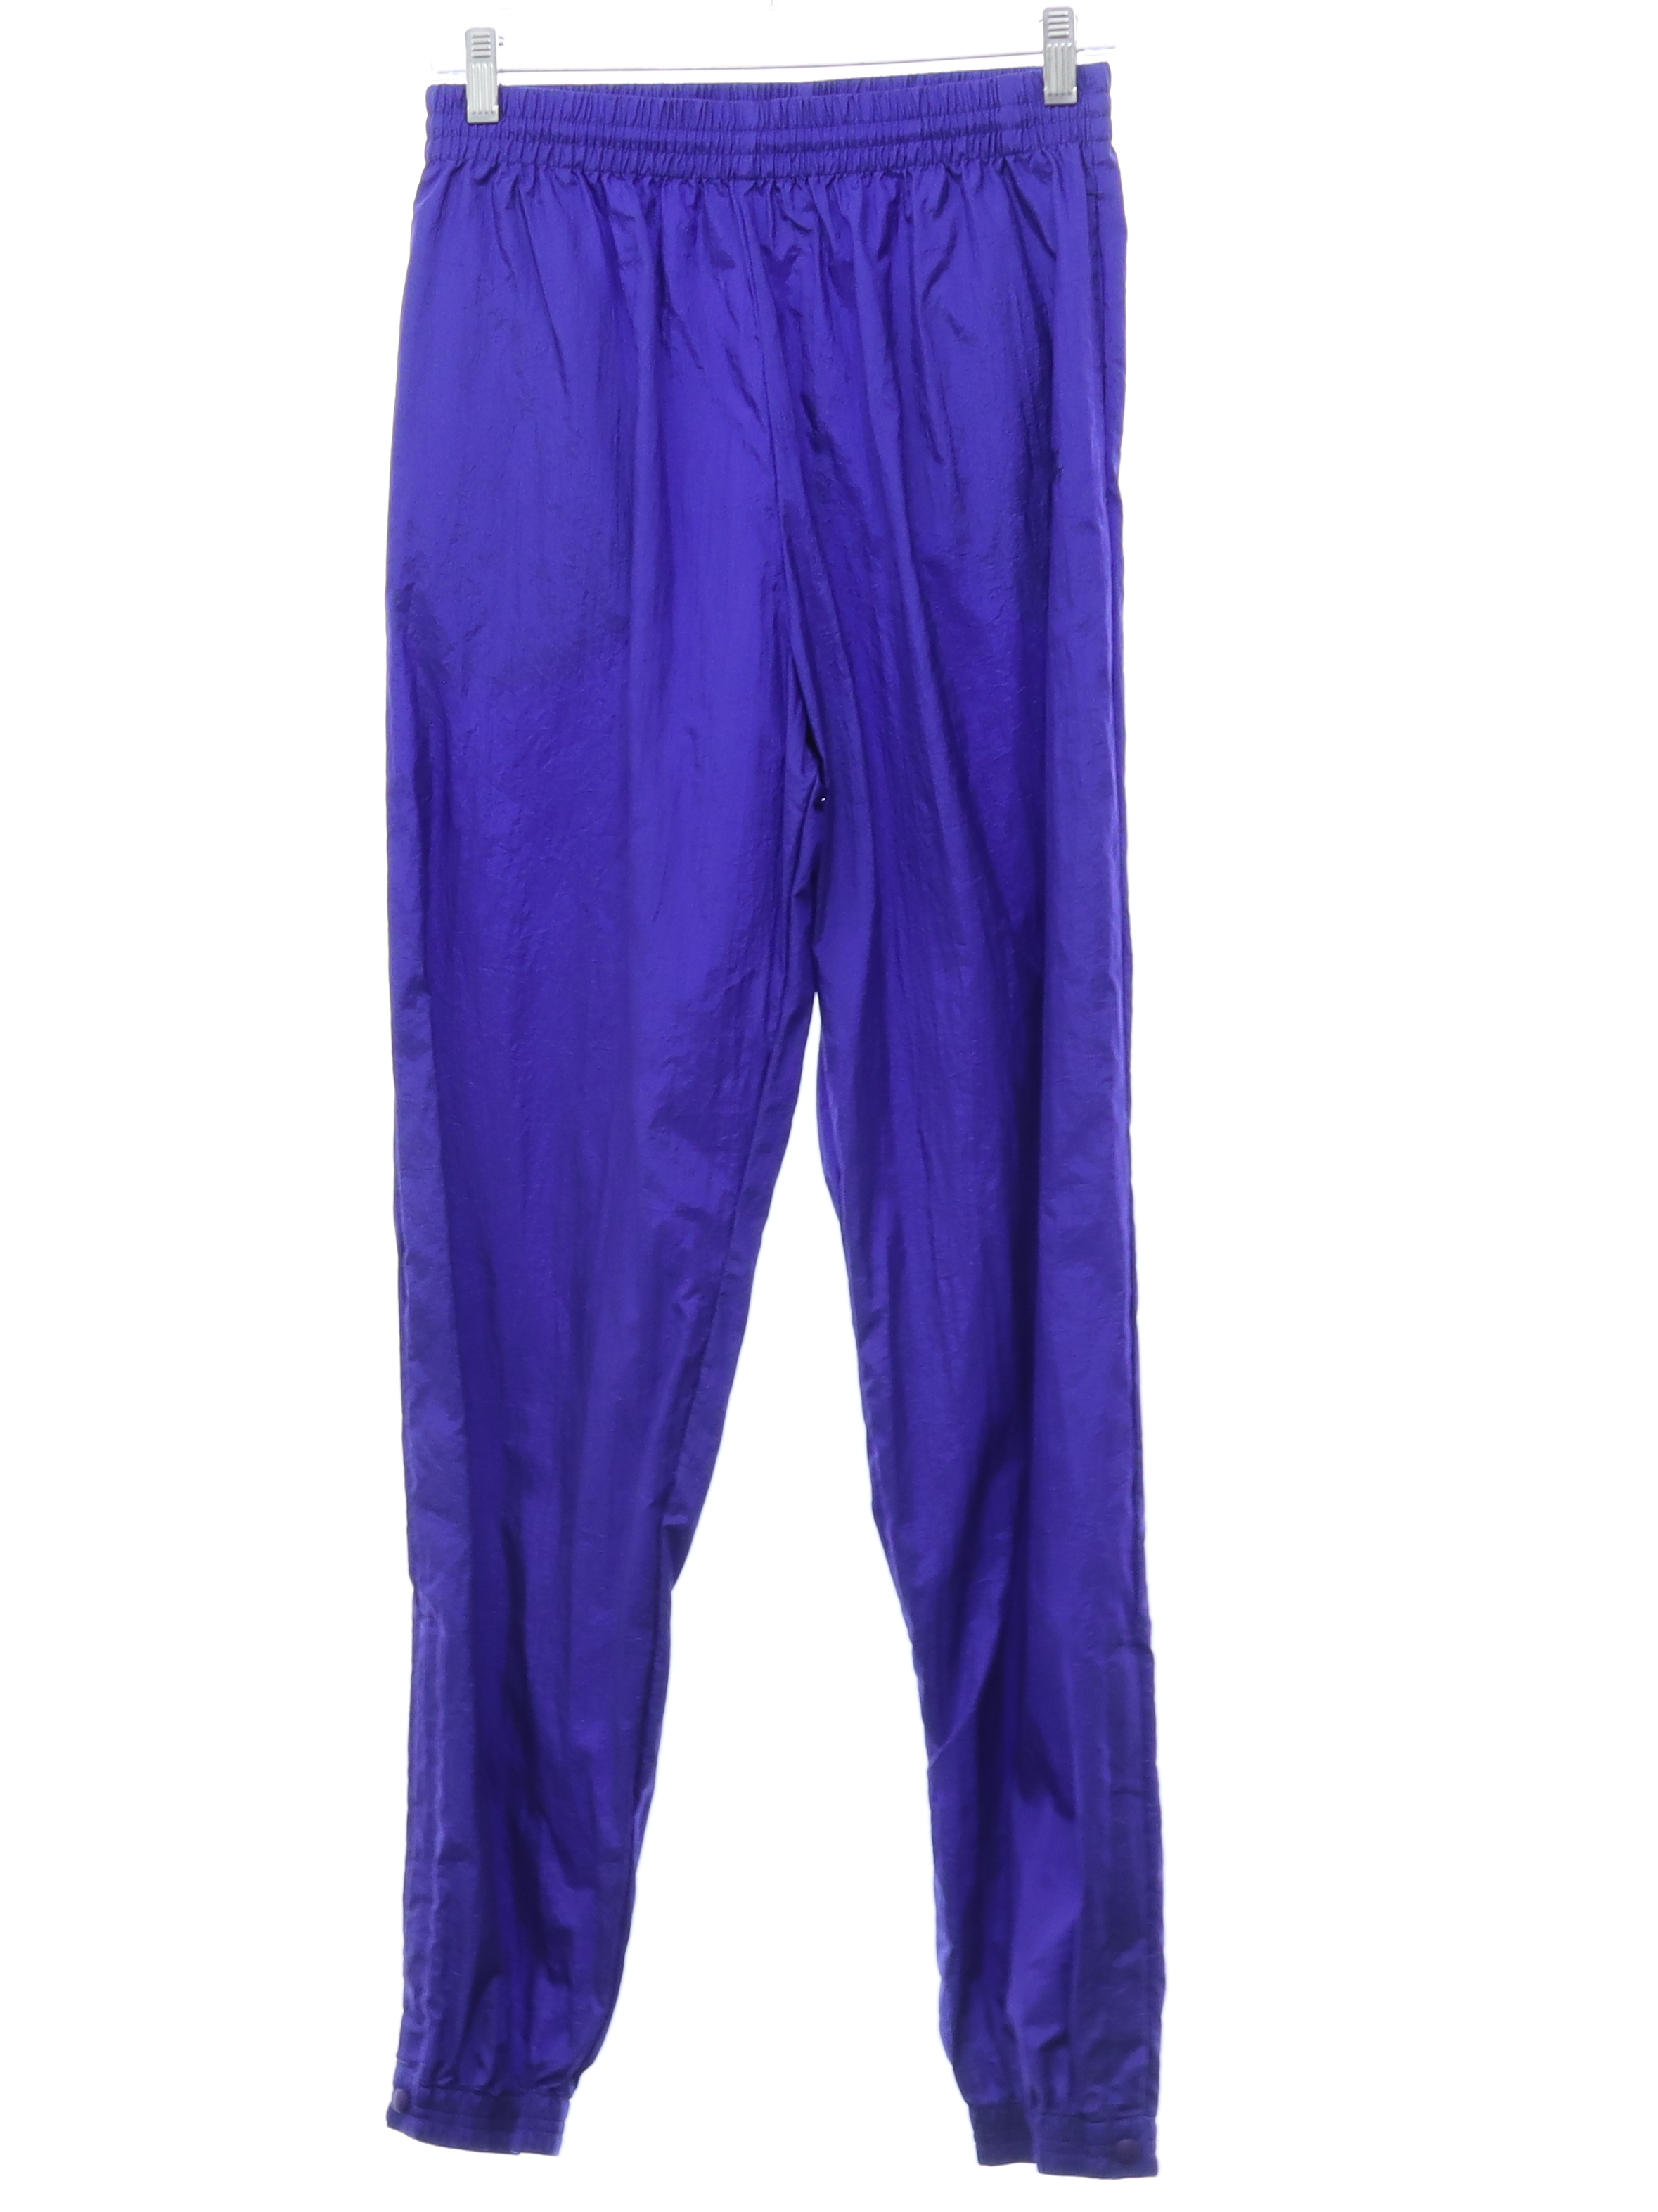 Retro 80s Pants (Moving Comfort) : 80s style (made recently